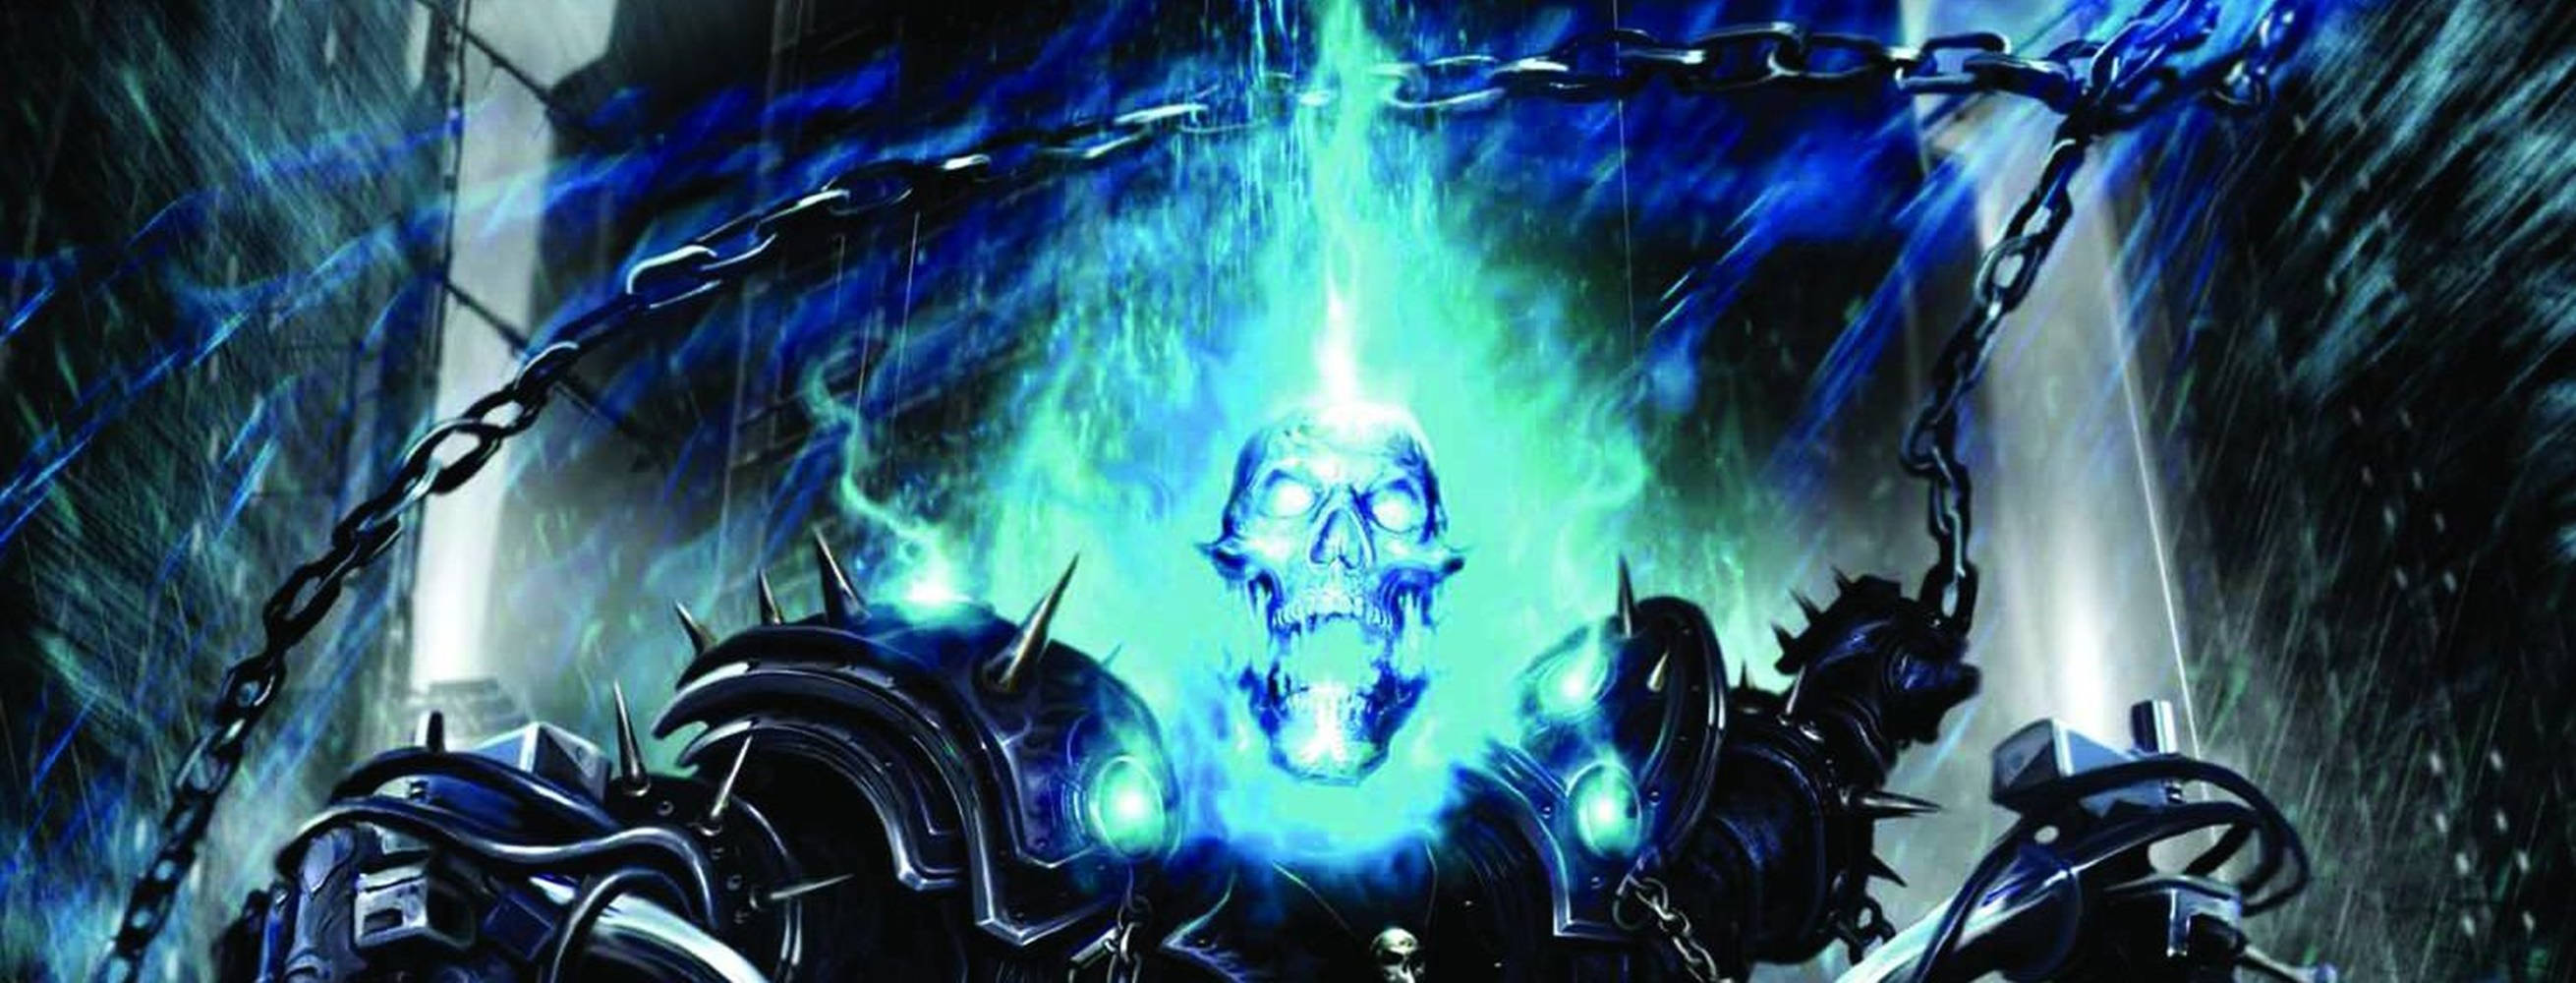 Blue Ghost Rider Exaggerated Skull Background